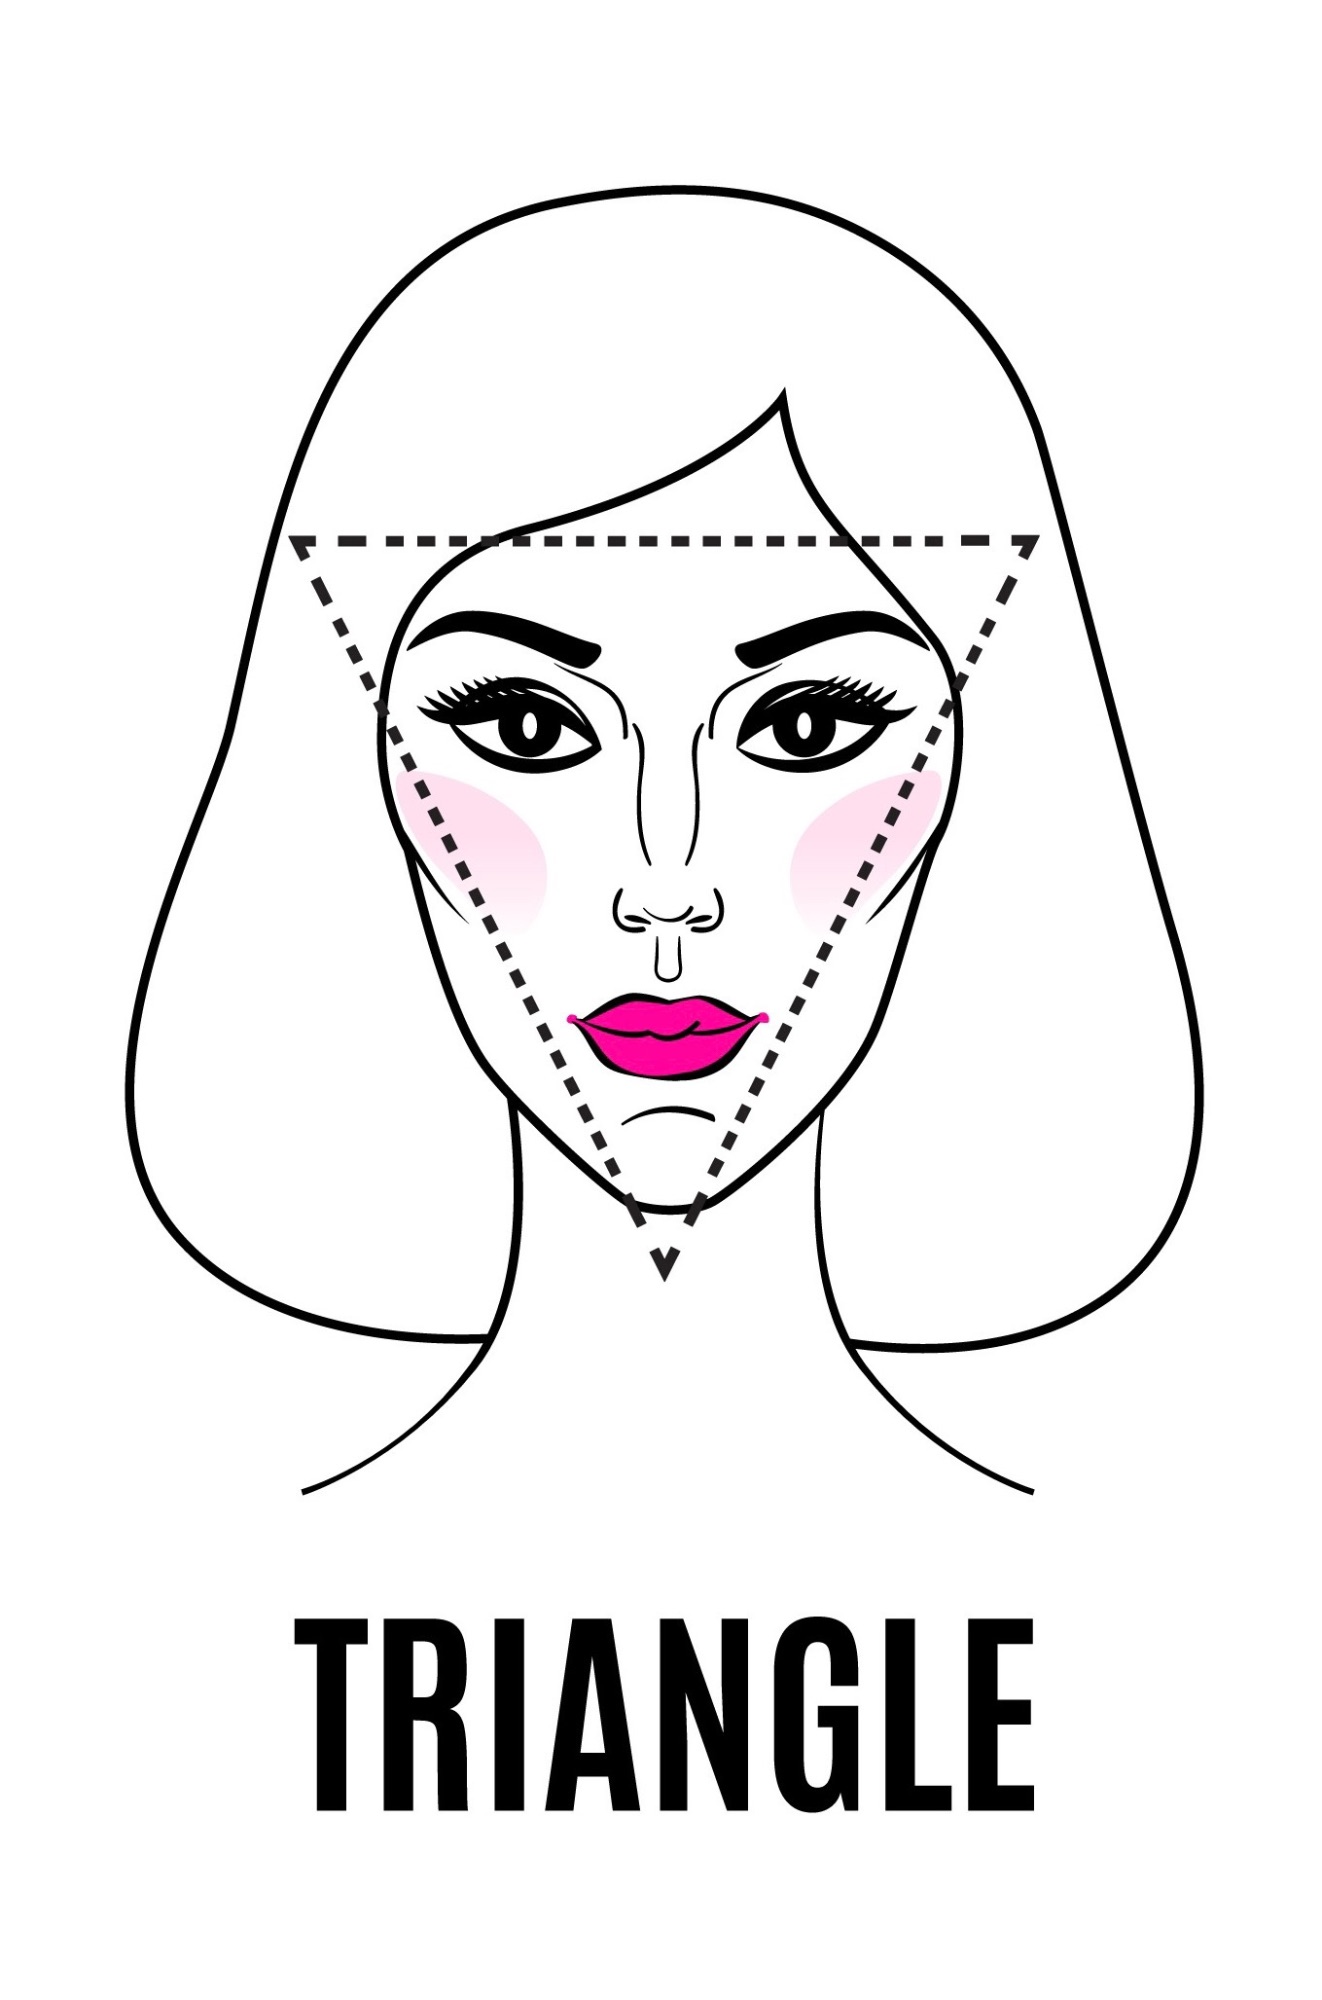 Drawing of a triangle shaped face